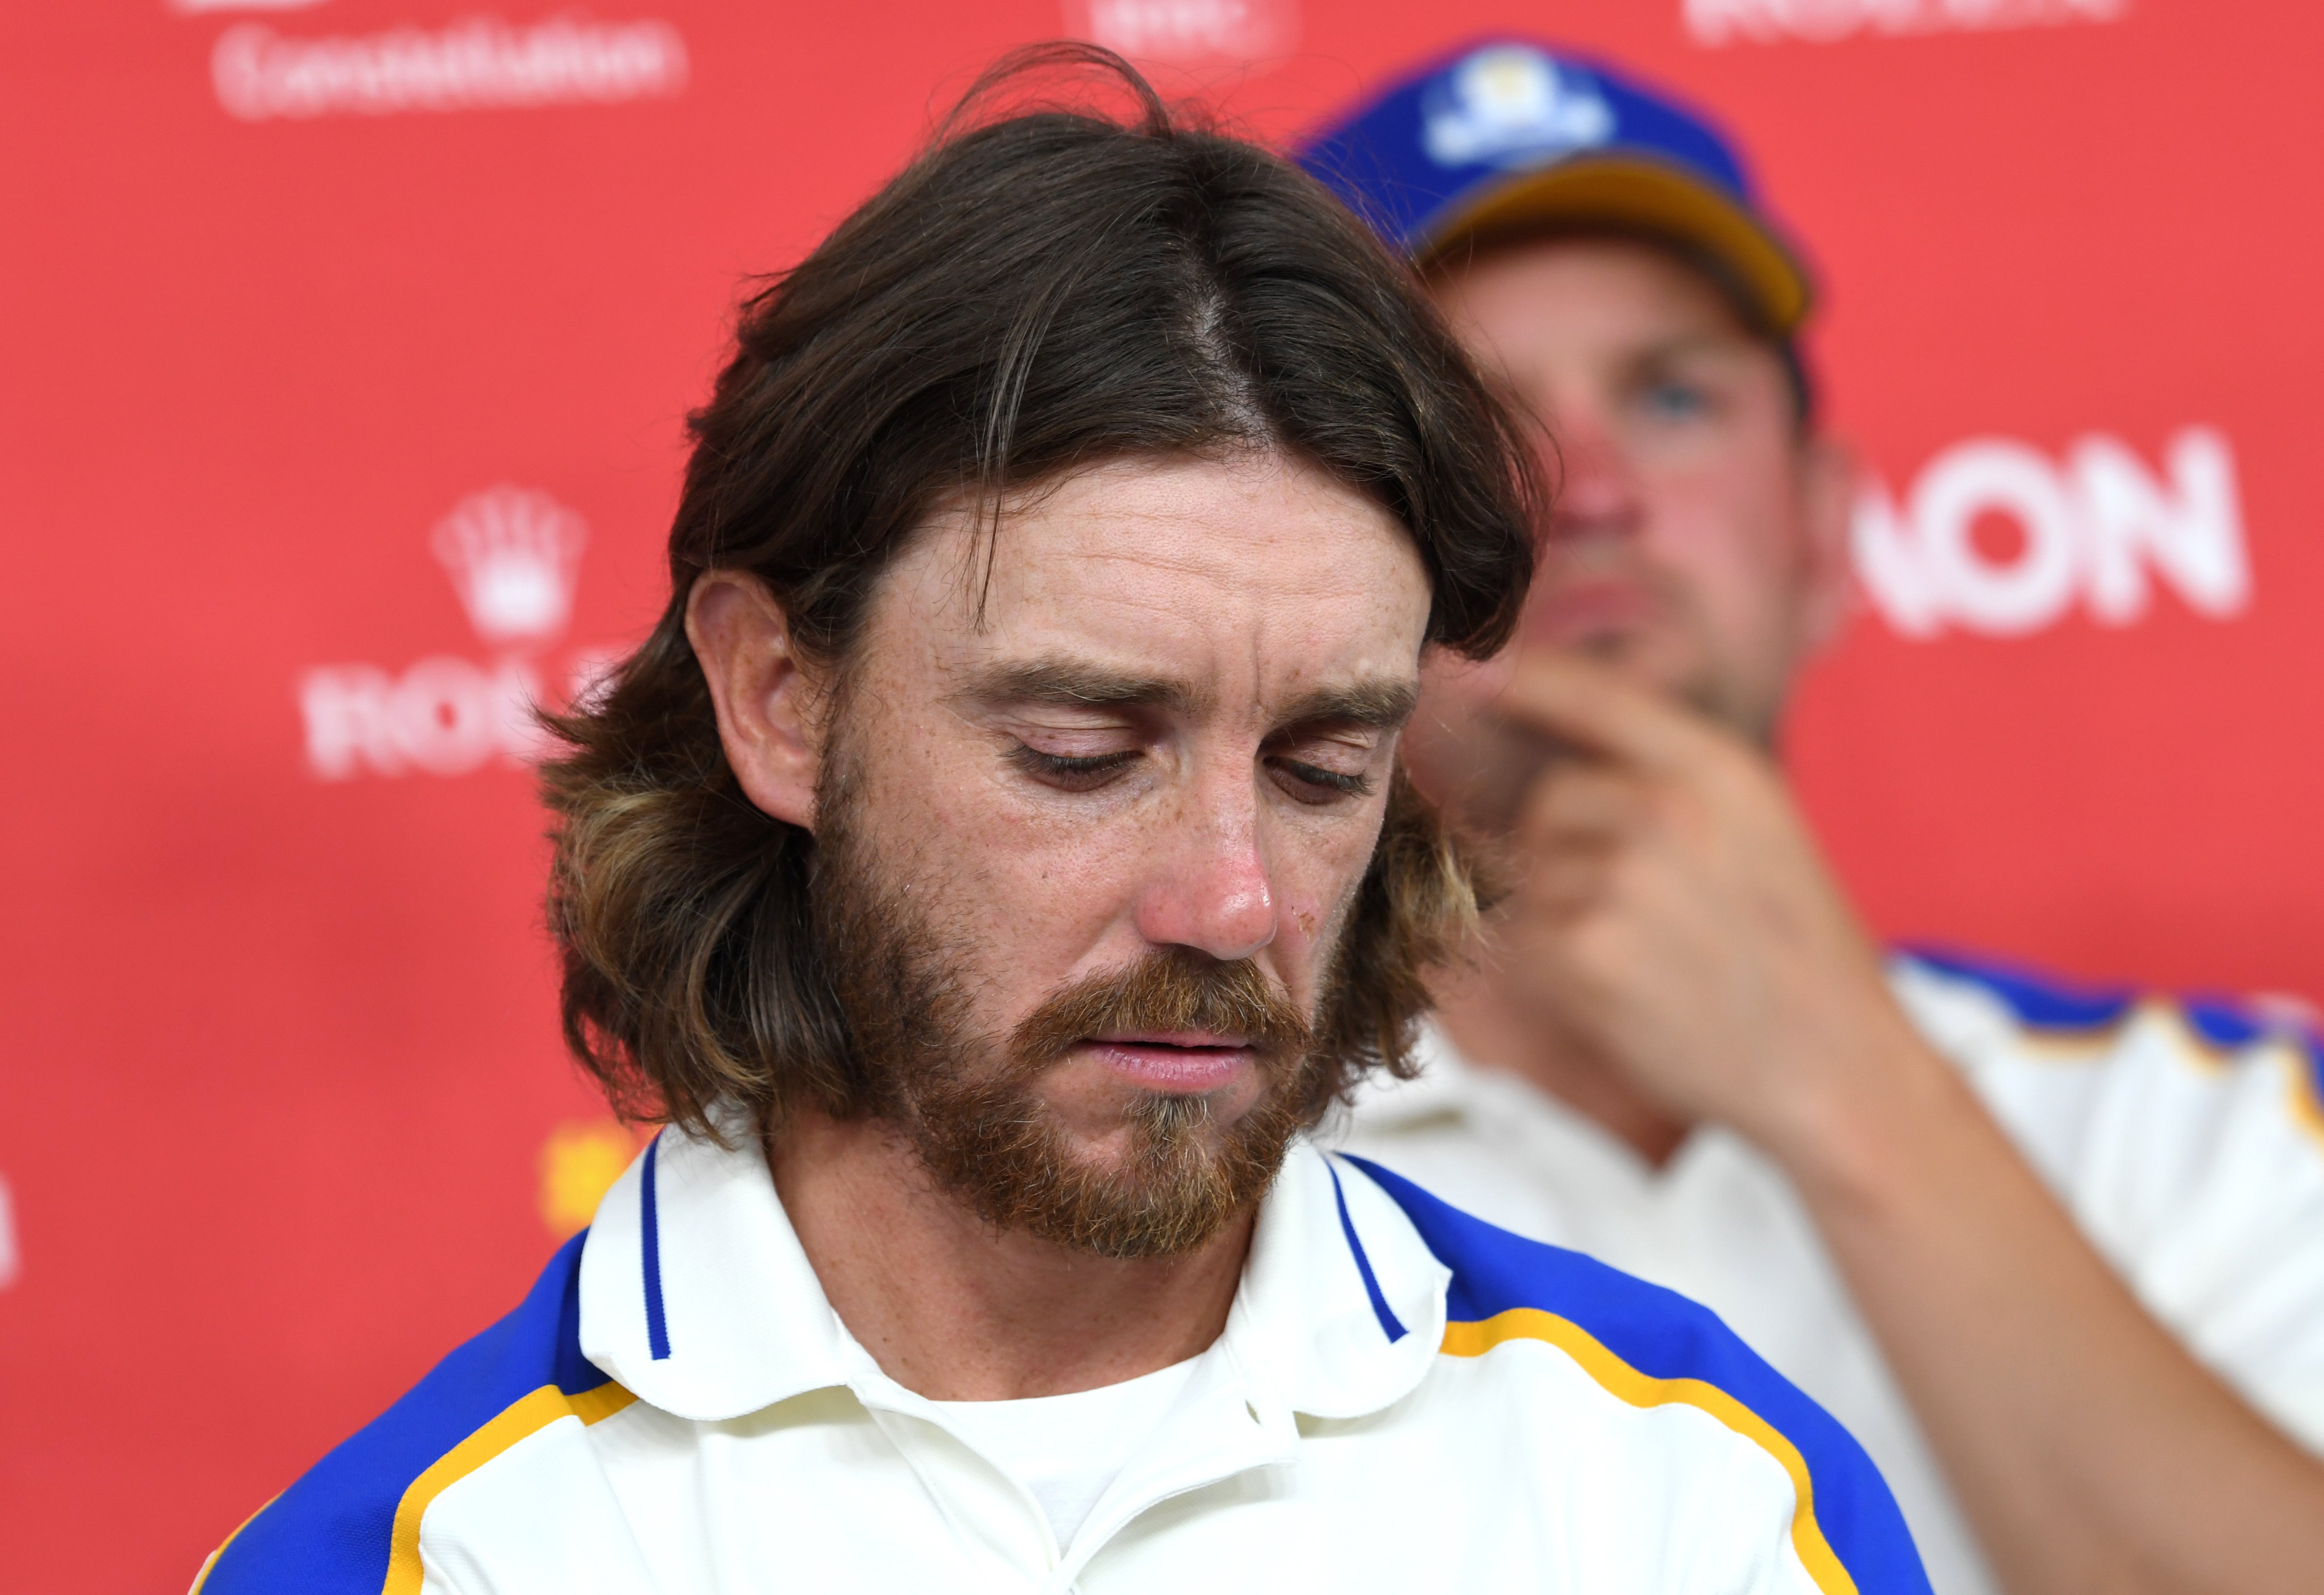 Europe’s Tommy Fleetwood looking downcast during a press conference after Europe’s Ryder Cup defeat (Anthony Behar/PA)